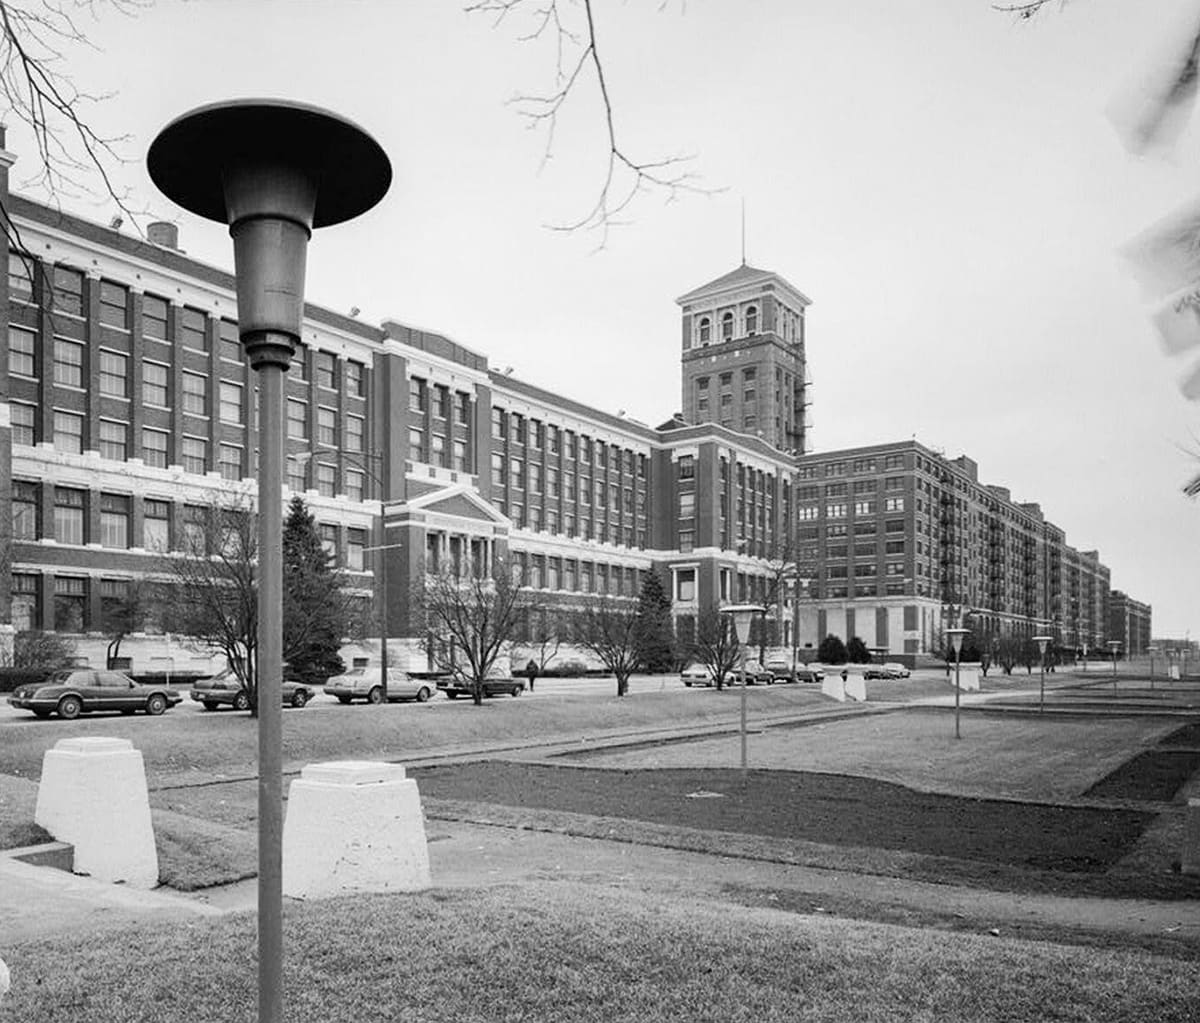 Historical photo of the Sears Homan Square tower and administration building